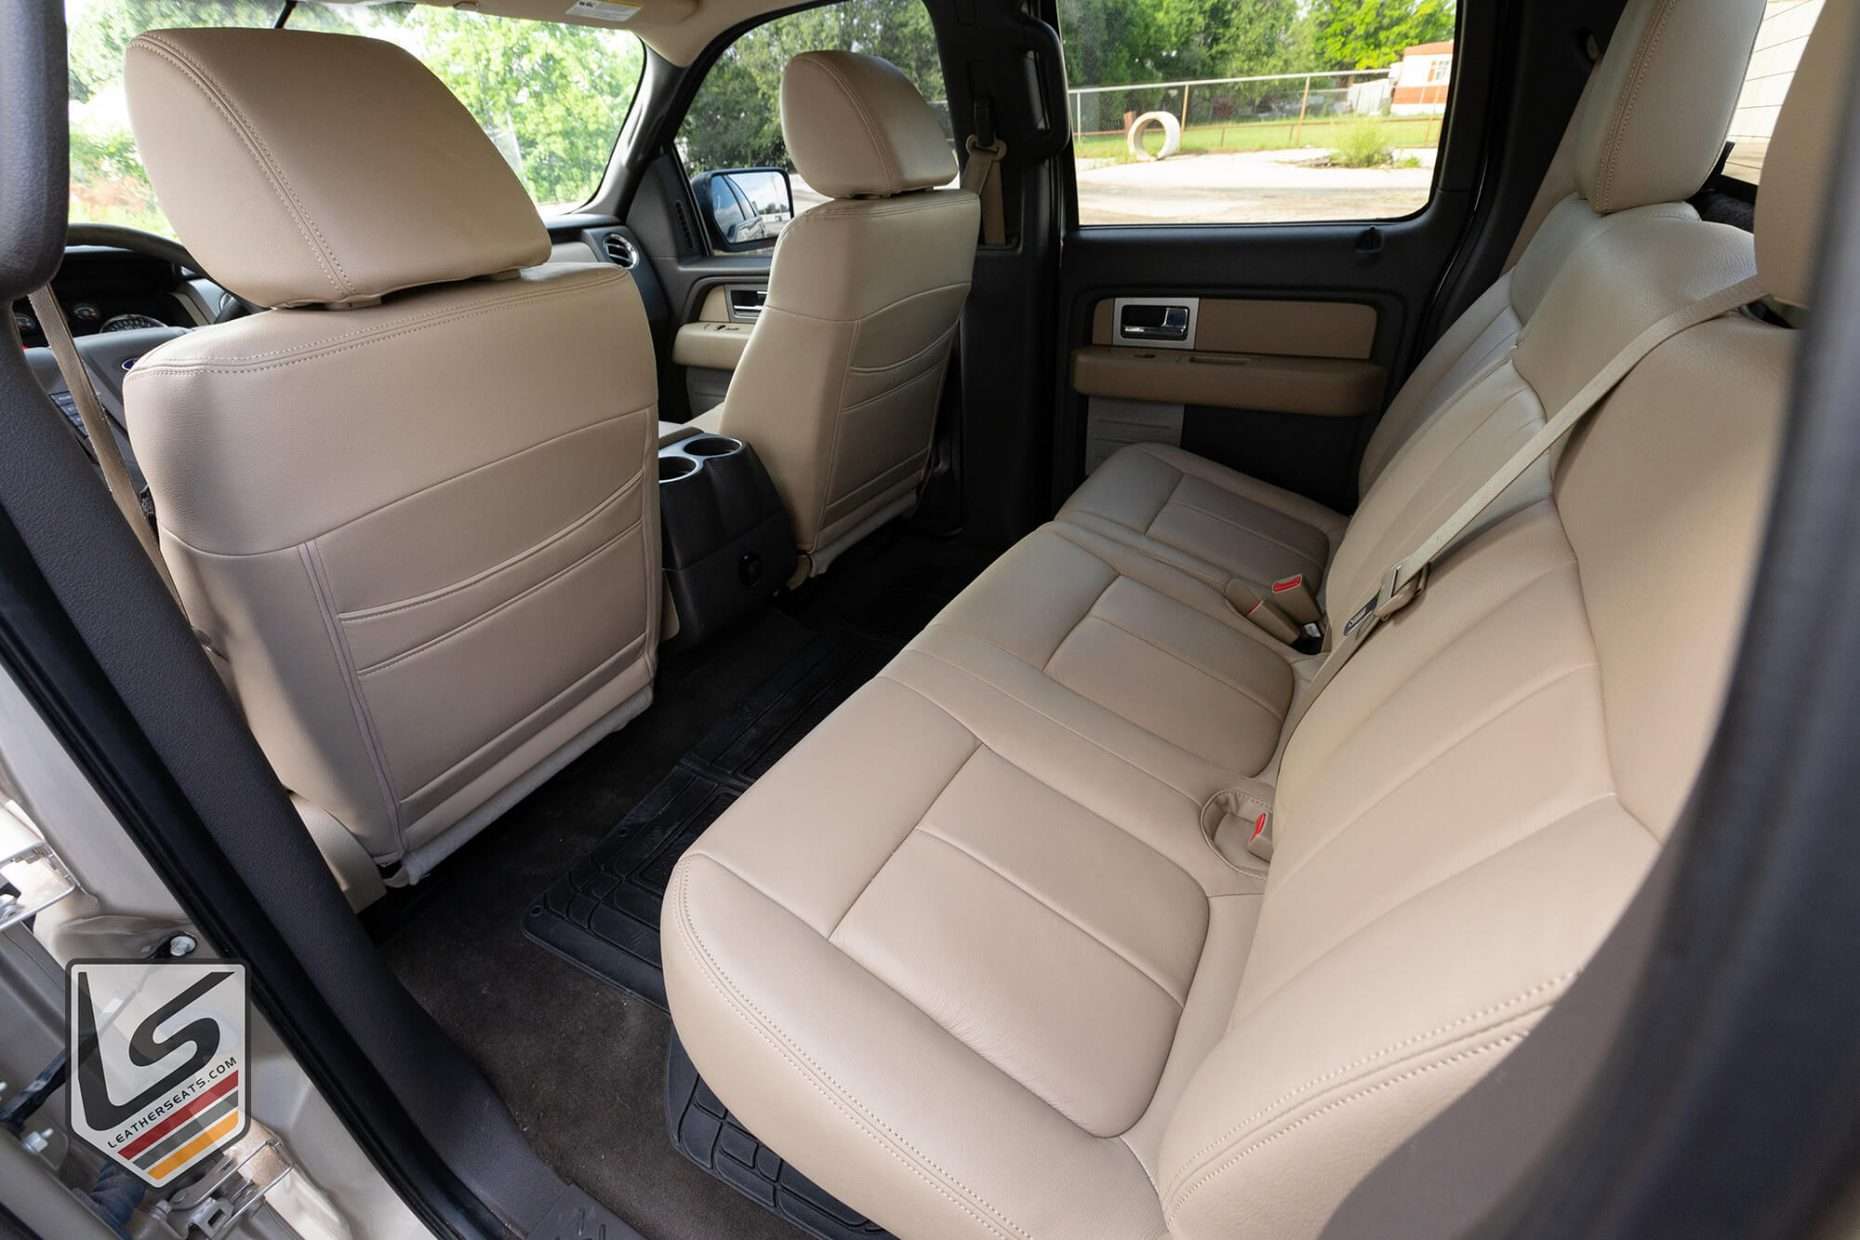 Rear leather seats and back view of front seats